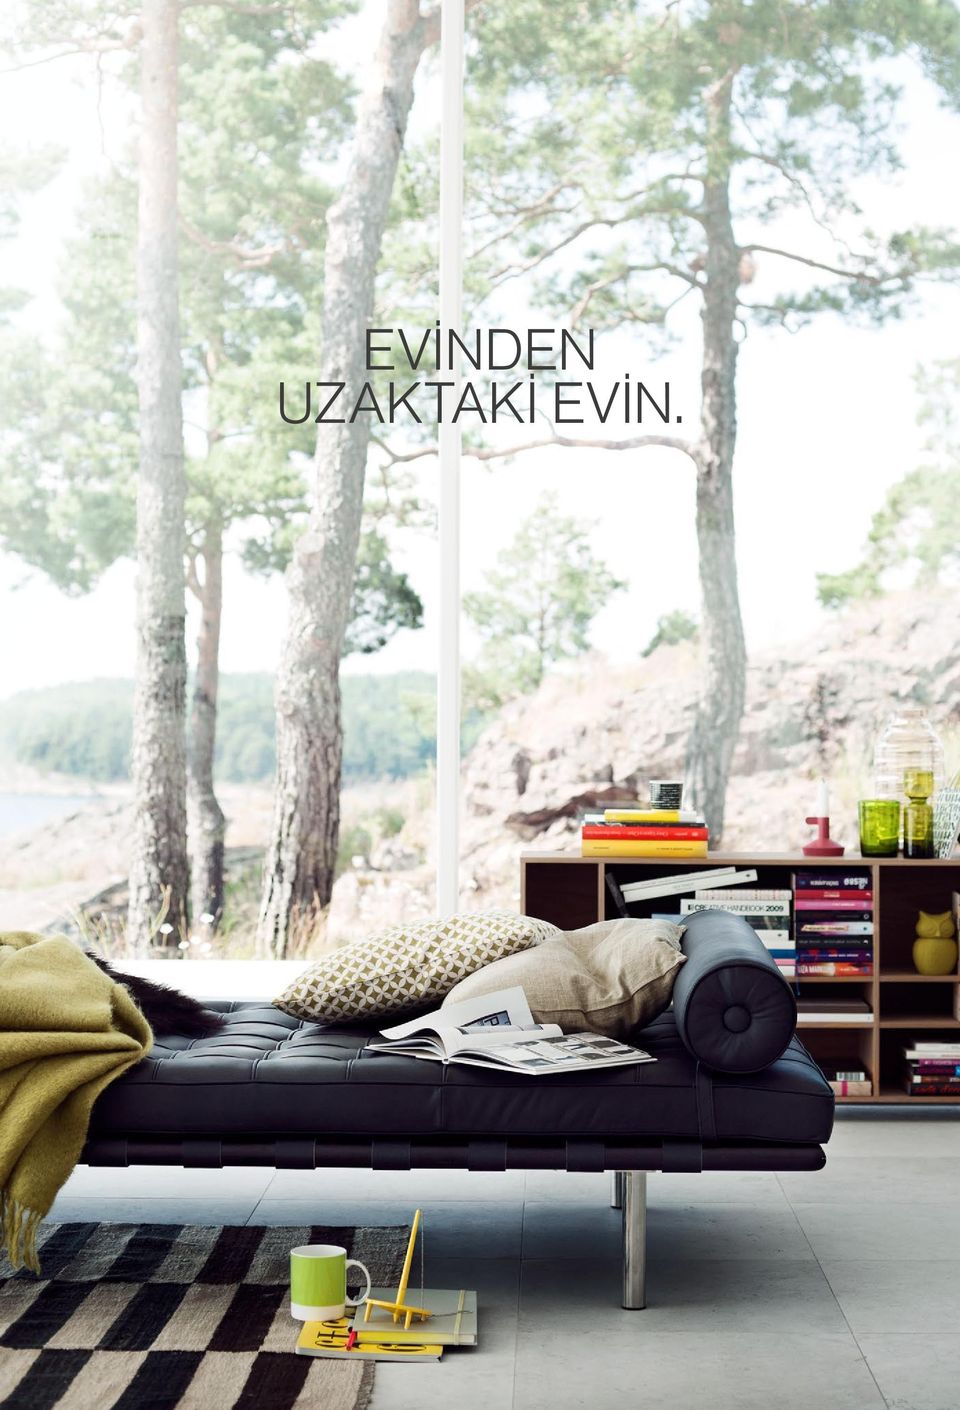 EVİN.